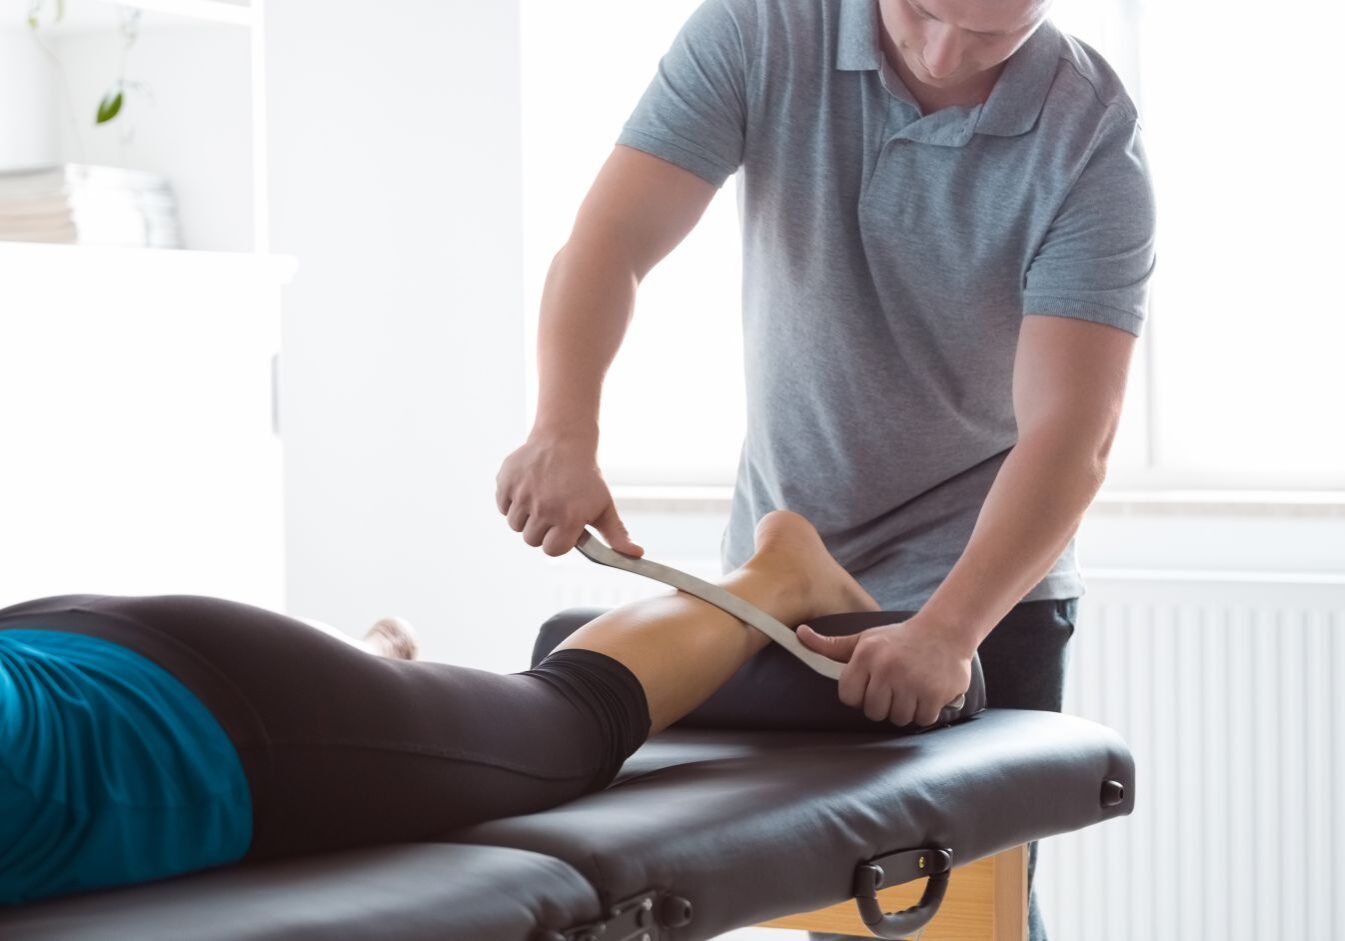 physical therapist massaging patient